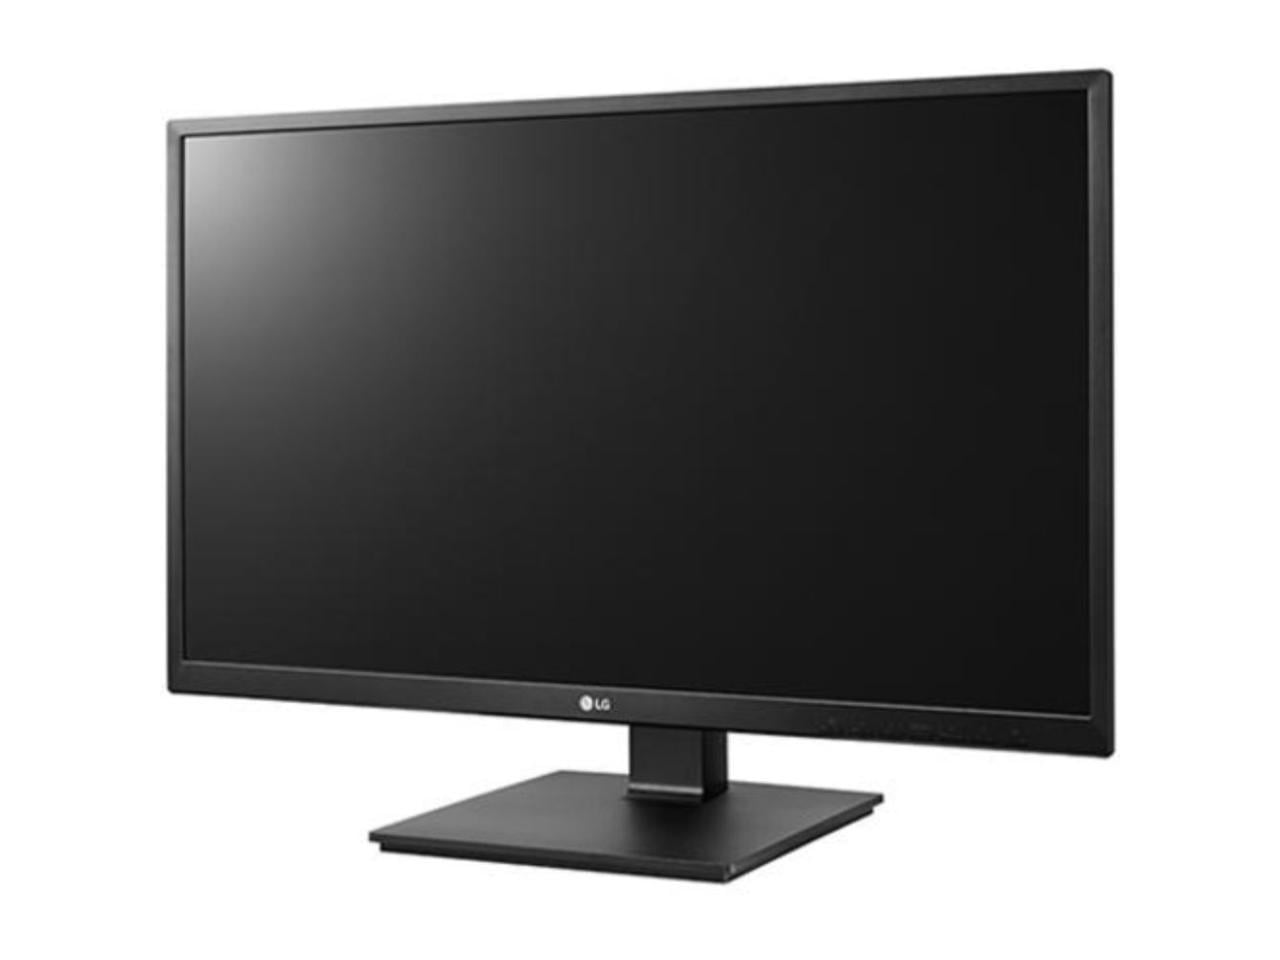 Picture of LG 24BK550Y-I 24 in. 1920 x 1080 16 isto 9 IPS LED Monitor - Black